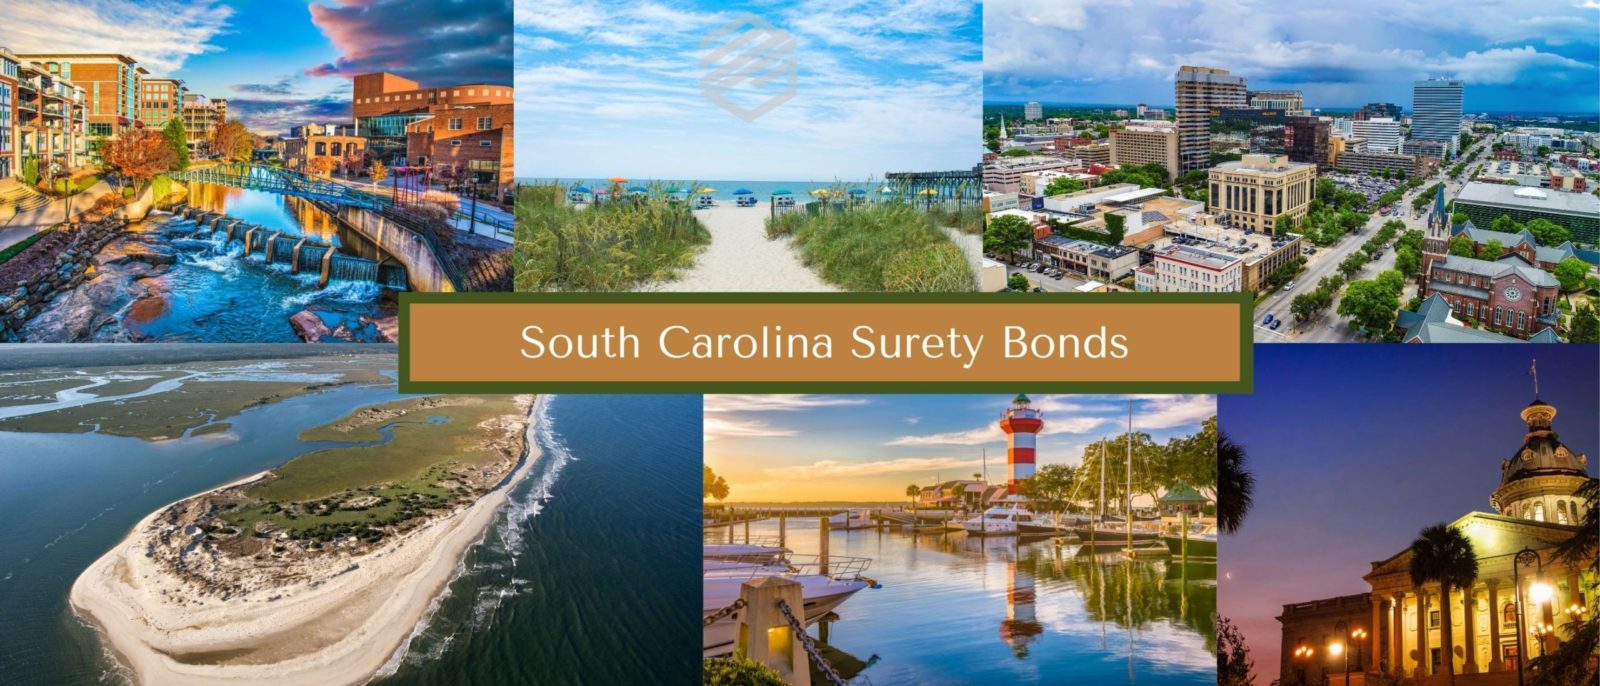 South Carolina Surety Bonds - 6 pictures representing South Carolina including Hilton Head, Columbia, the capital and the beach. A text box that reads "South Carolina Surety Bonds" in the middle